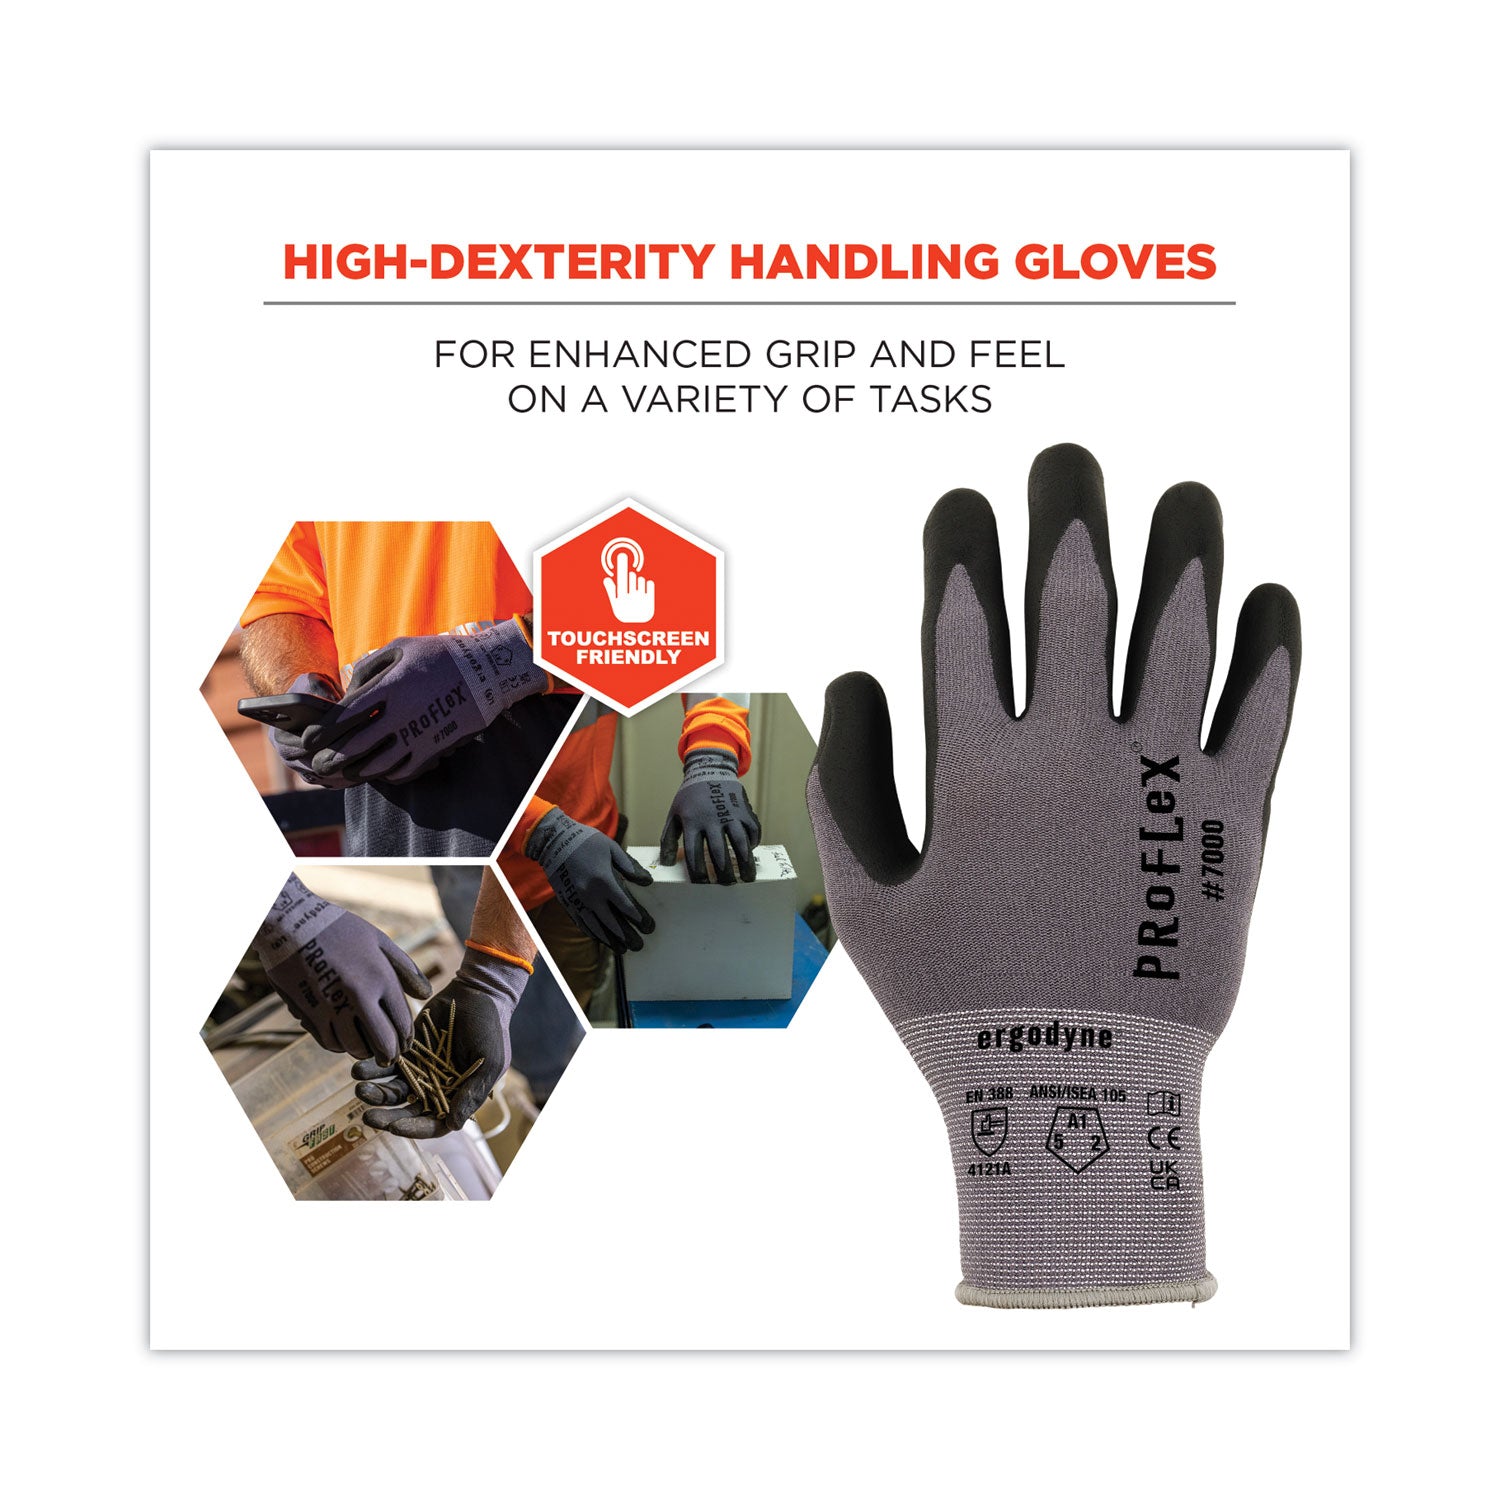 proflex-7000-nitrile-coated-gloves-microfoam-palm-gray-small-12-pairs-pack-ships-in-1-3-business-days_ego10362 - 2